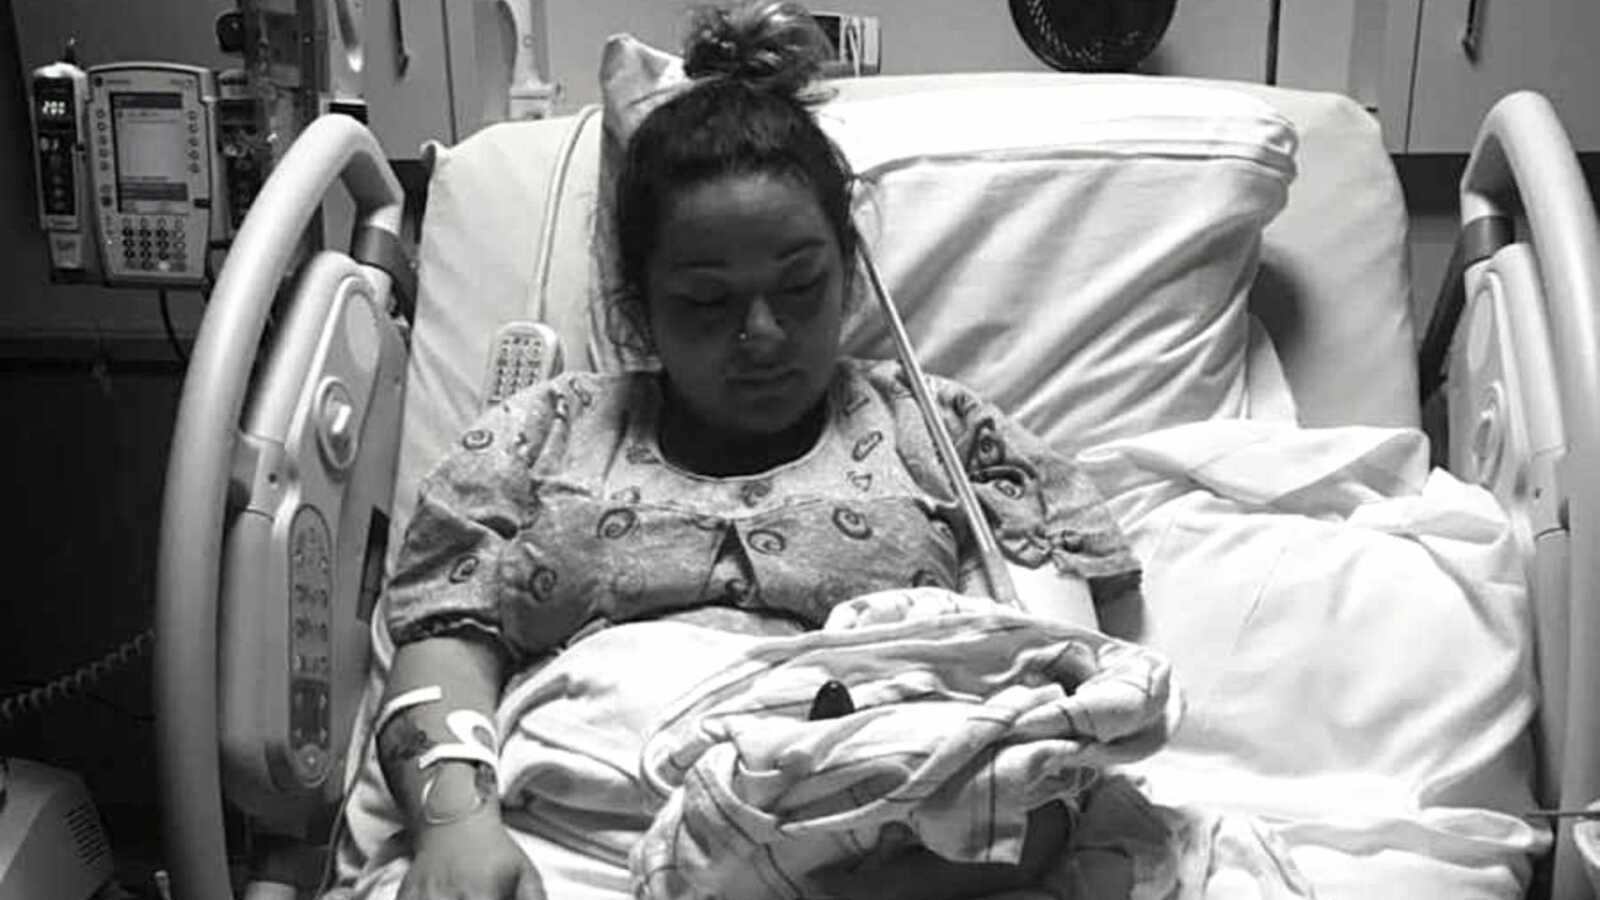 Grieving mom holds premature baby in hospital bed